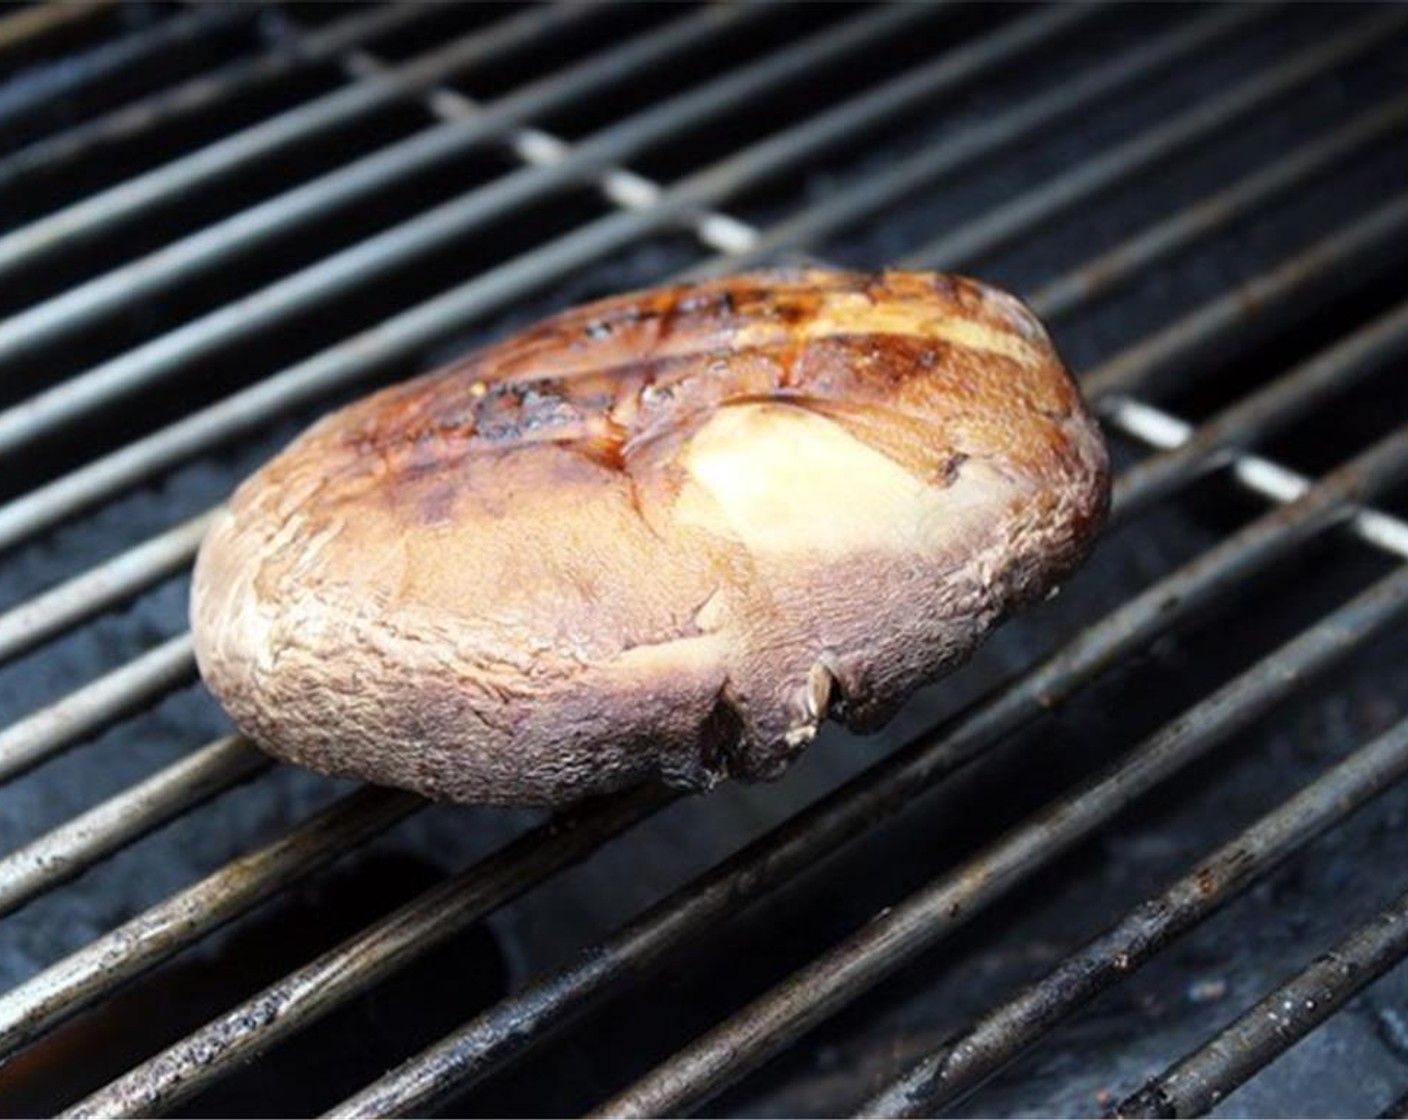 step 4 Grill the Portobello Mushroom until soft and well marked, about 7 minutes per side.